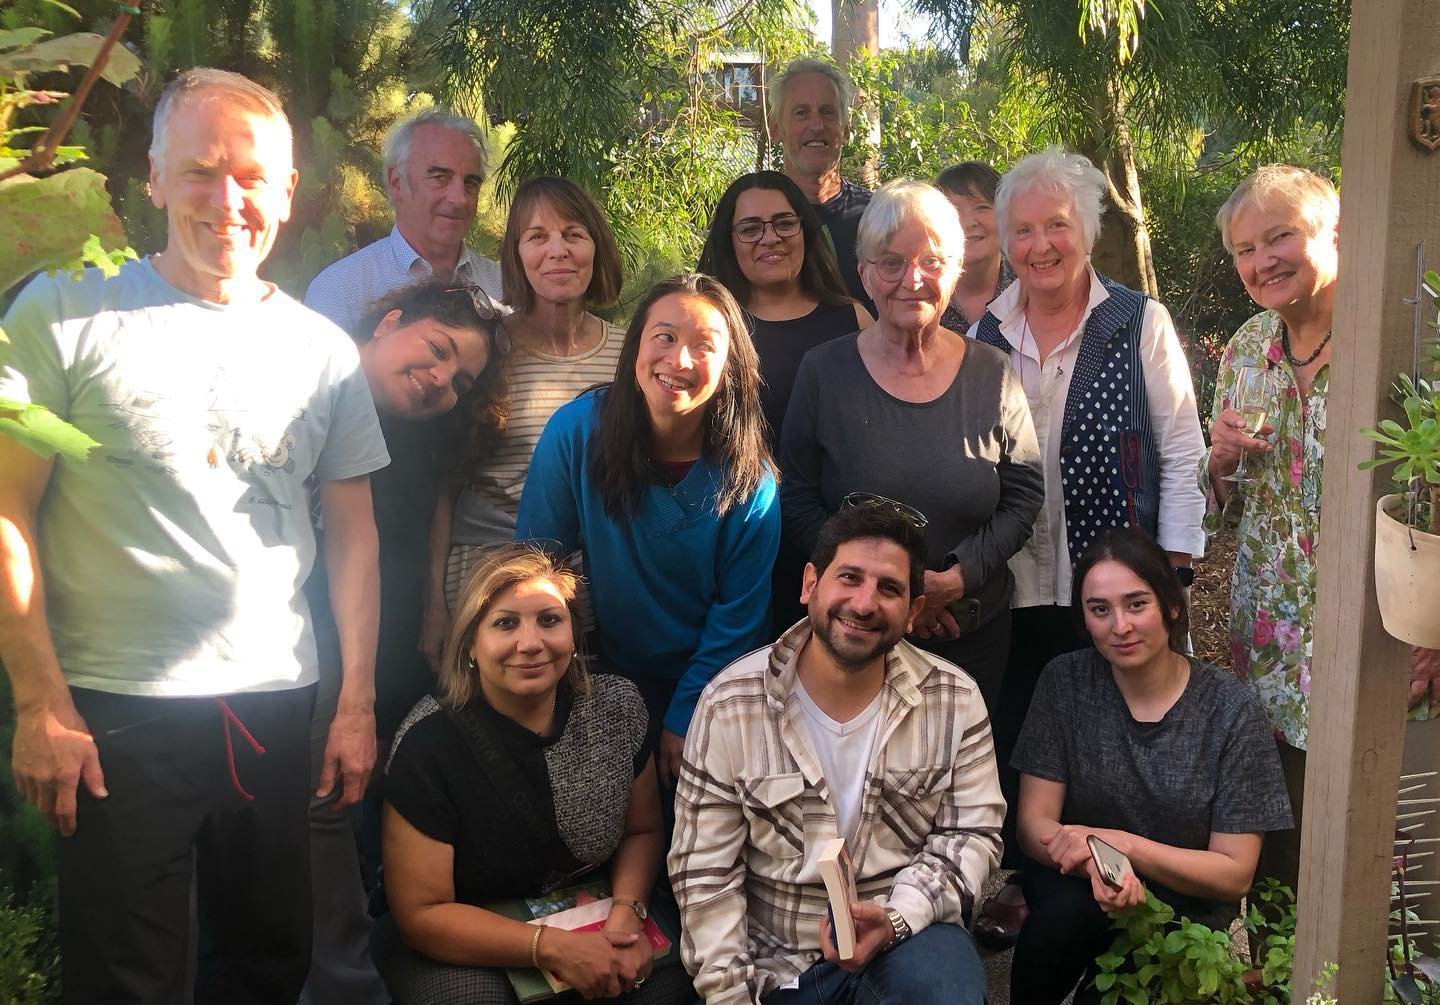 Brilliant weekend with fellow writers Jacinta Halloran, Gregory Day, Shokeefa Azar &amp; Ahn Nguyen Austin listening to stories from Iran, Afghanistan, Syria, Turkey &amp; Vietnam and mentoring some fabulous emerging writers. Kudos to @rural_australi